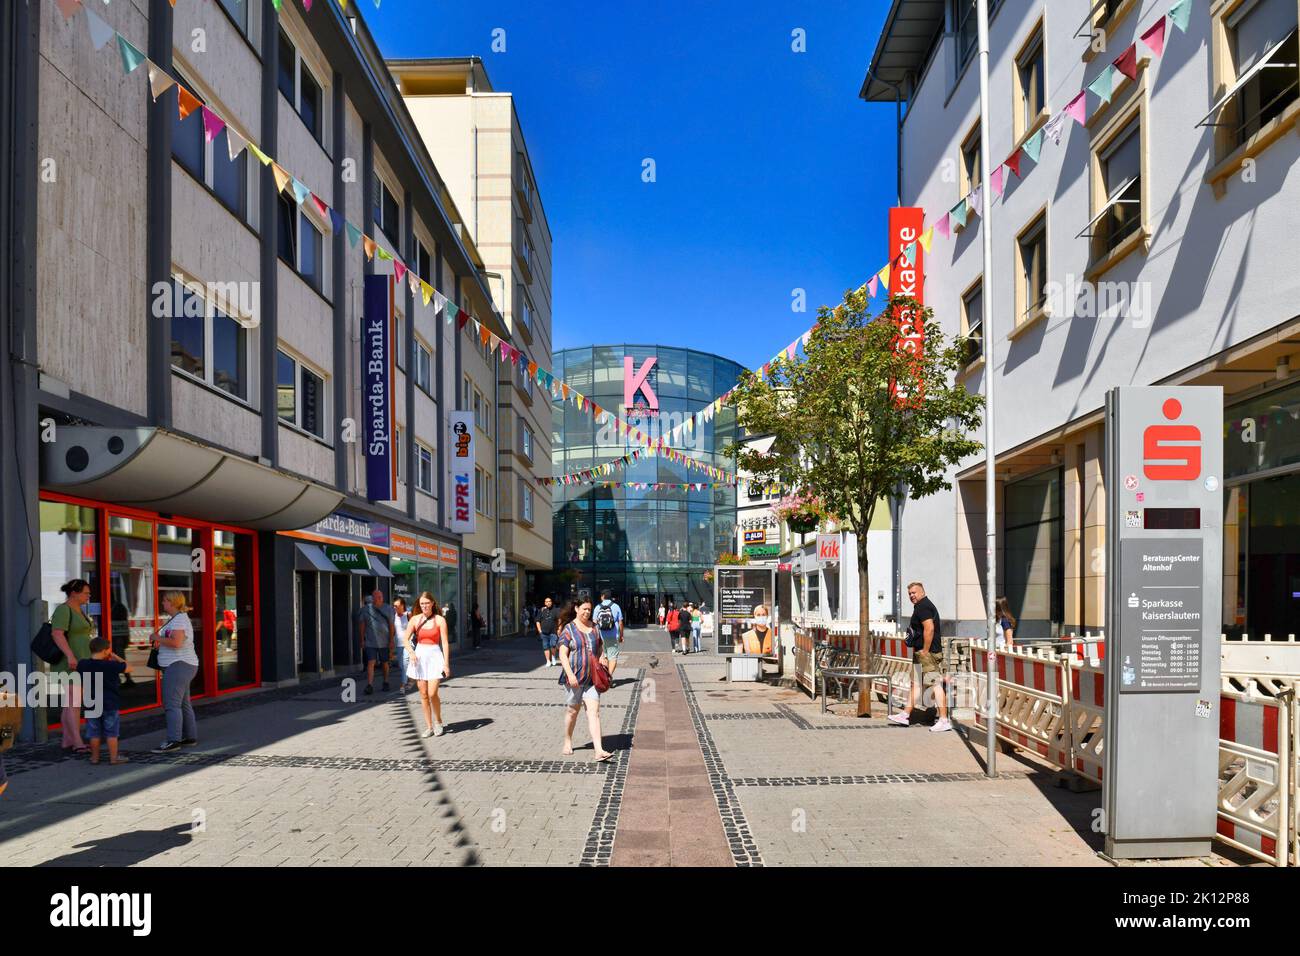 Kaiserslautern, Germany - August 2022: Shopping street called 'Fackelstrasse' with people and shopping center called 'K' in city center Stock Photo